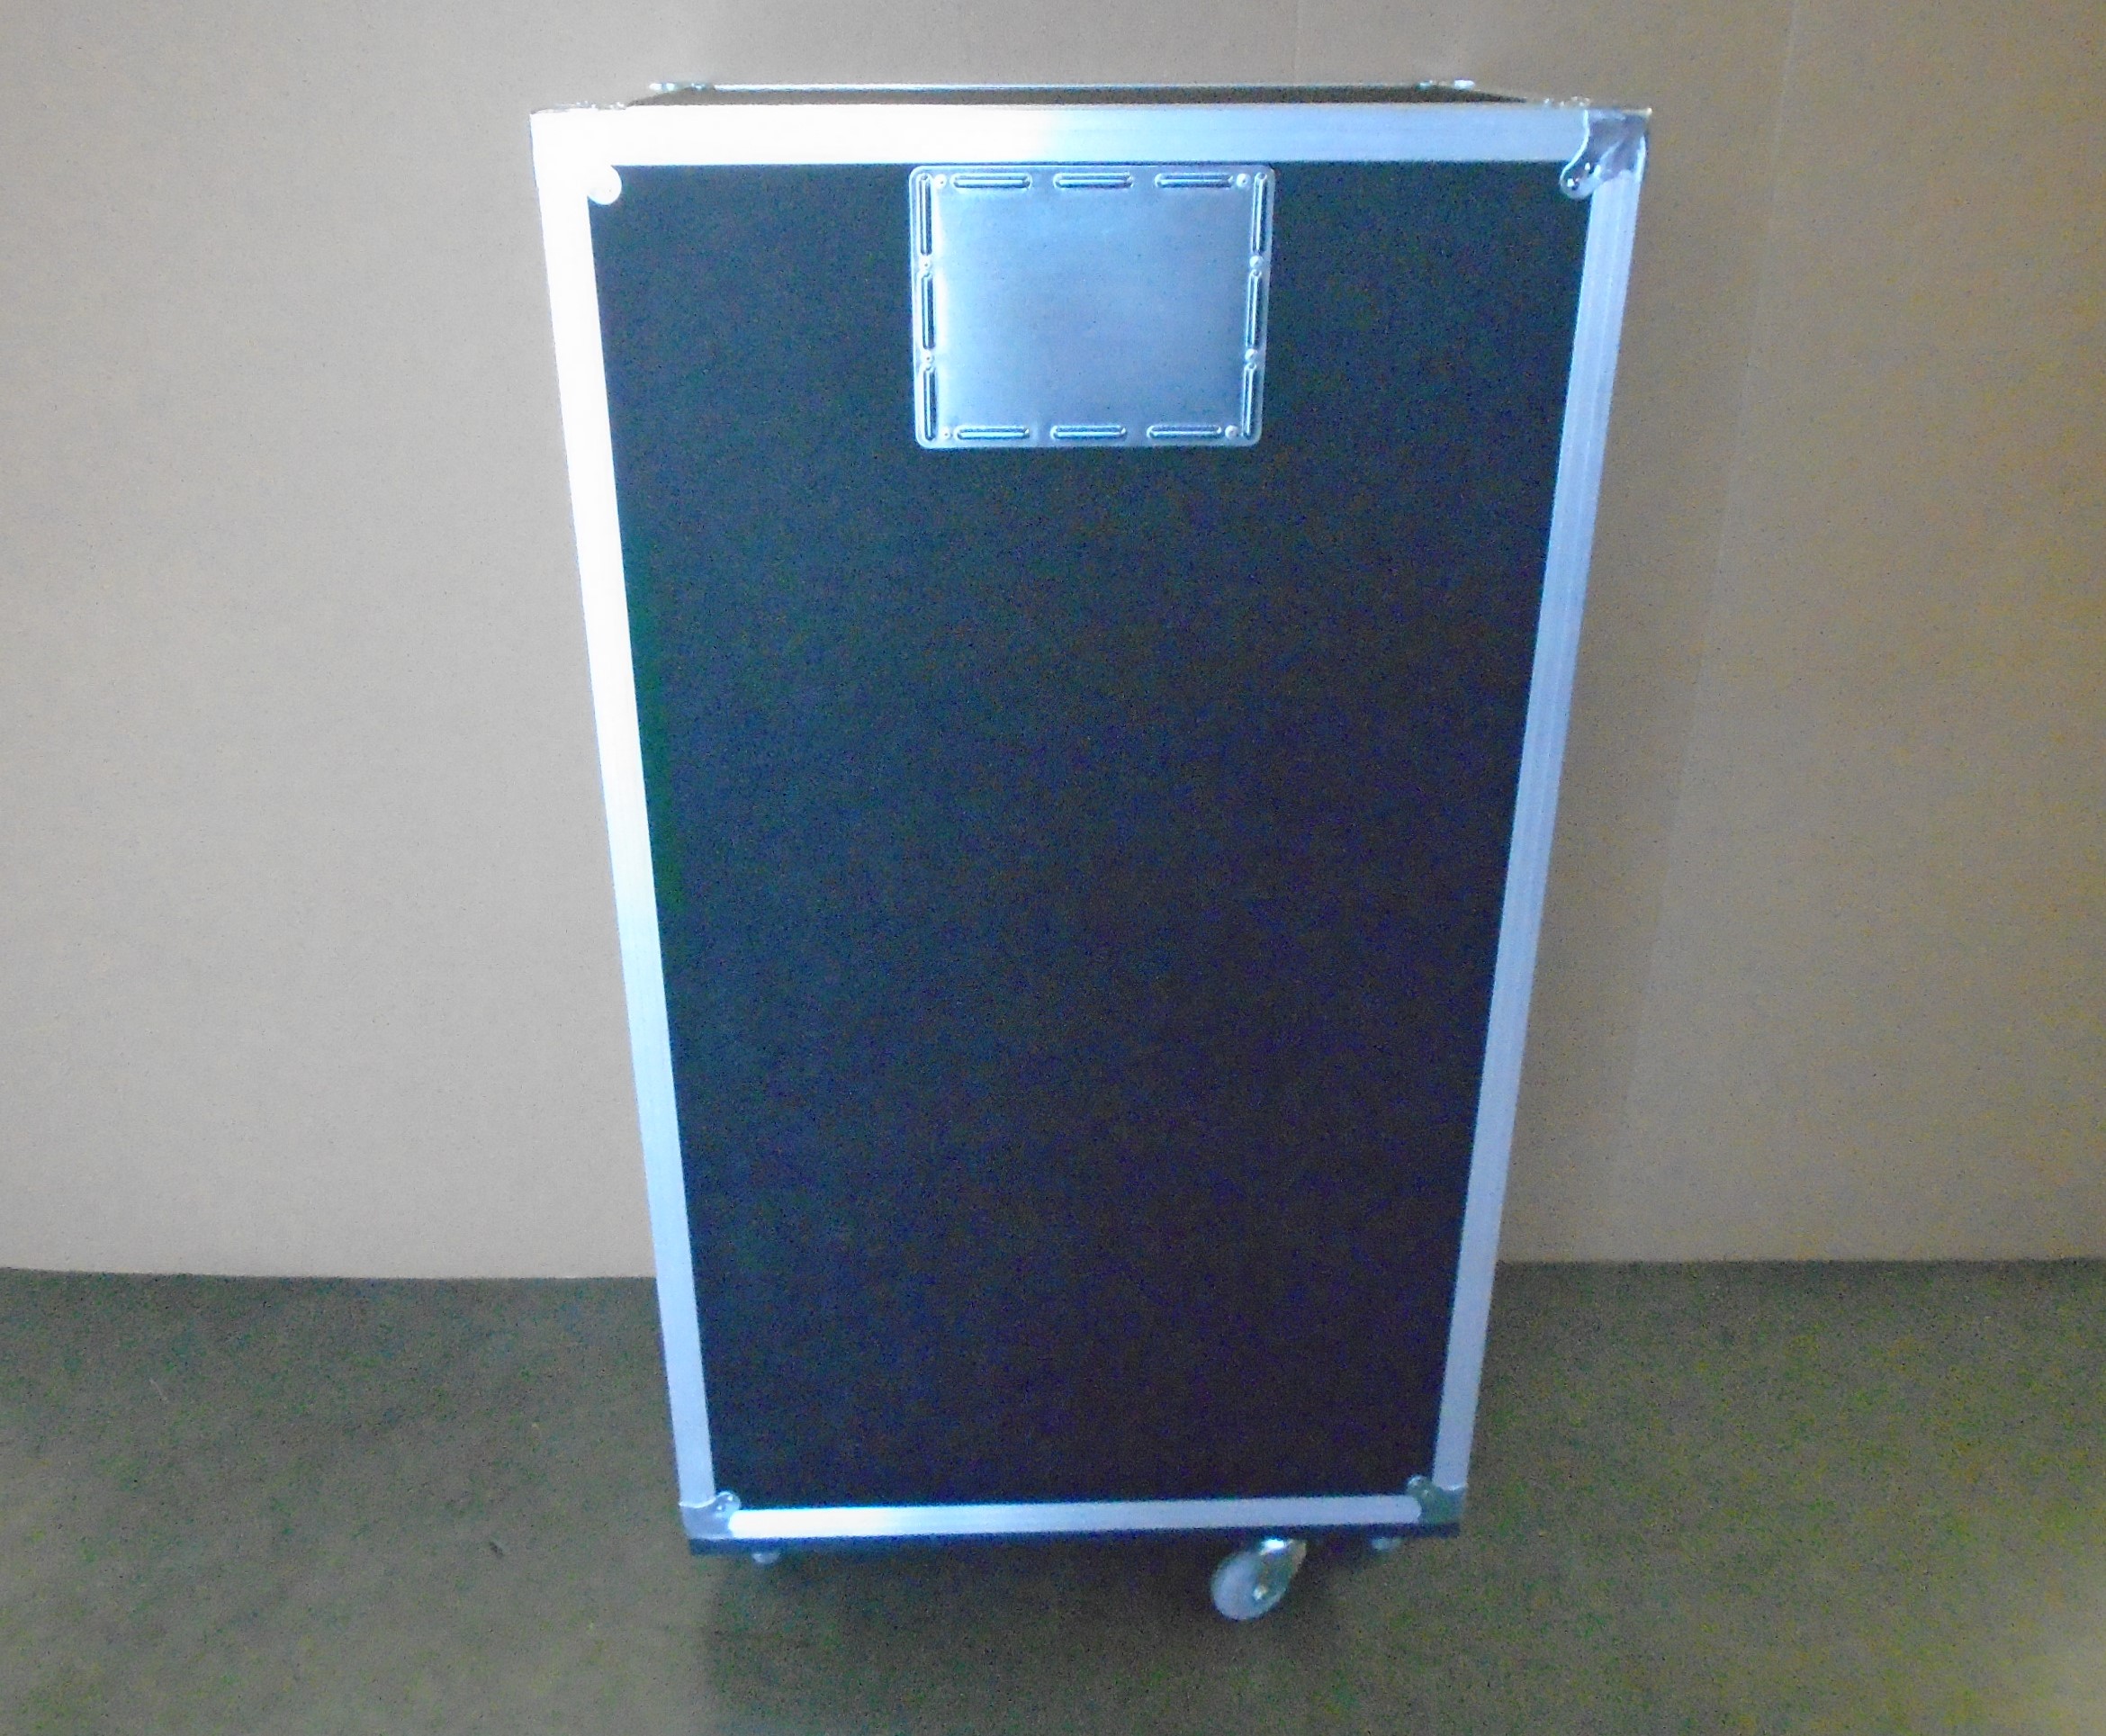 Print # 8193 - Custom Road Case for Display2Go LECTCV Acrylic Lectern By Nelson Case Corp